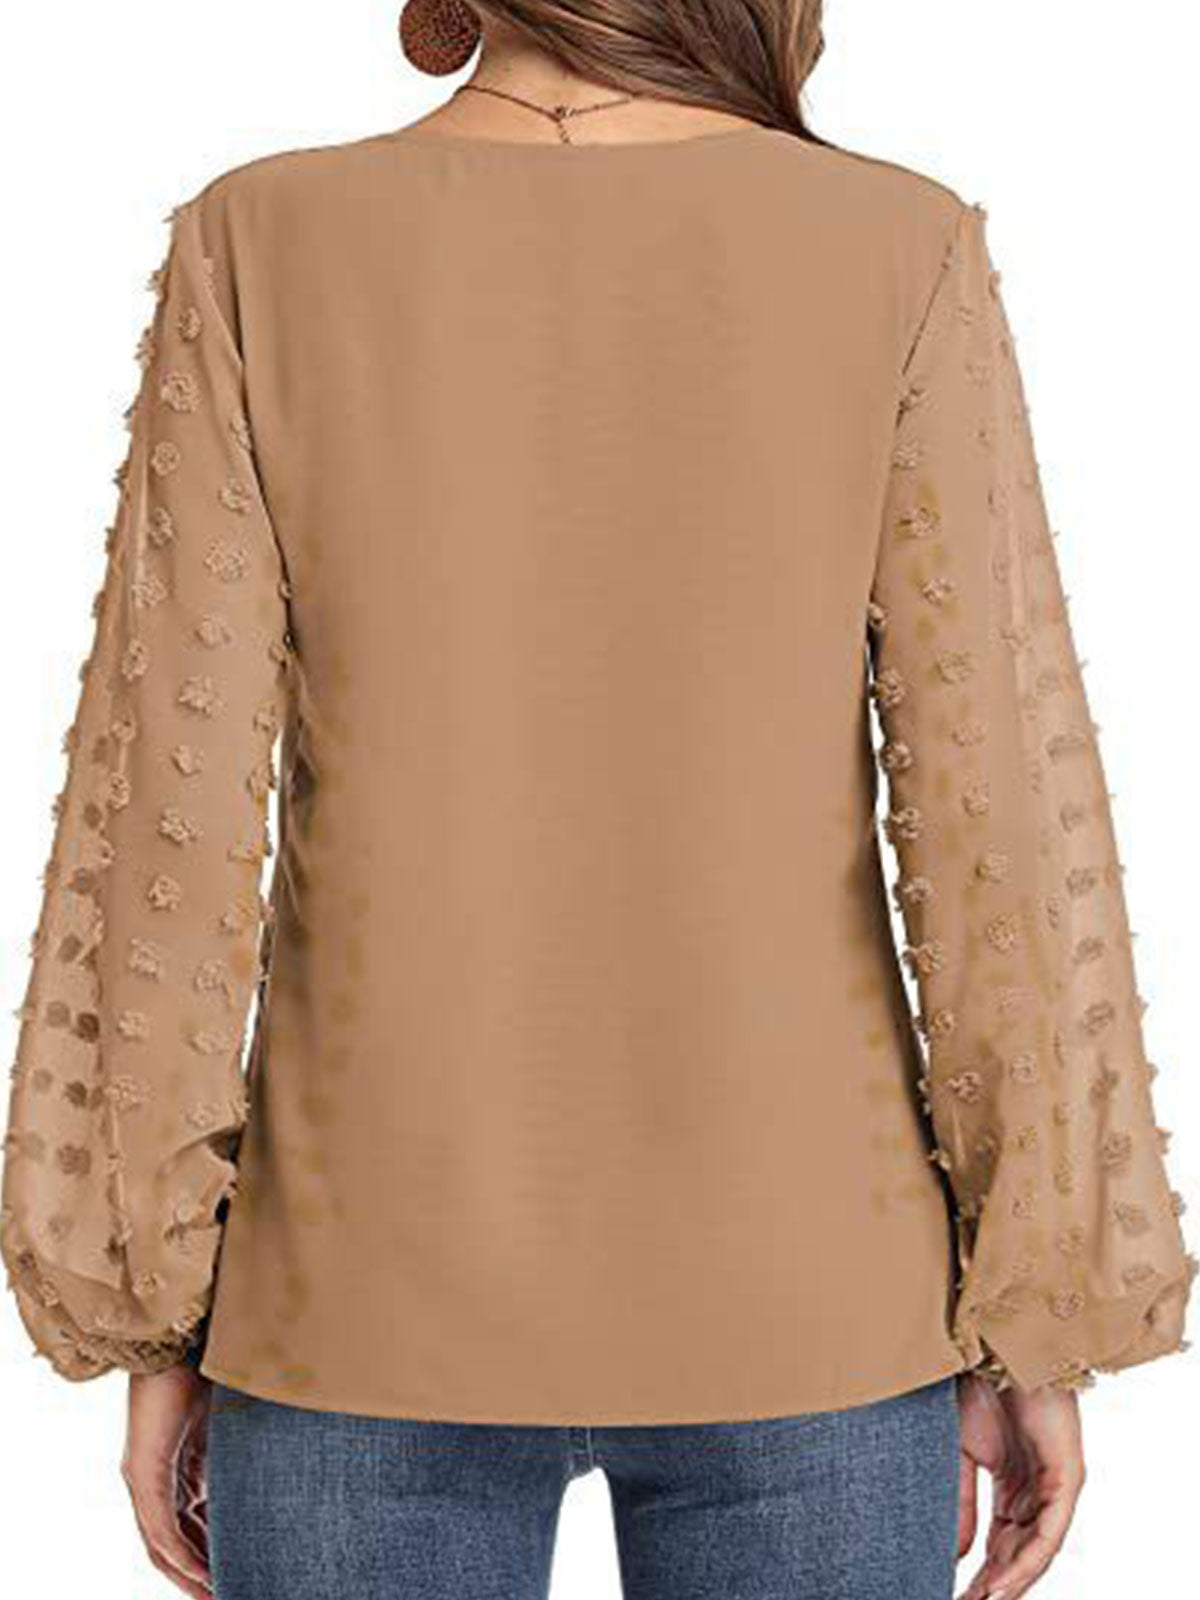 Puff Sleeve Solid Color Tops